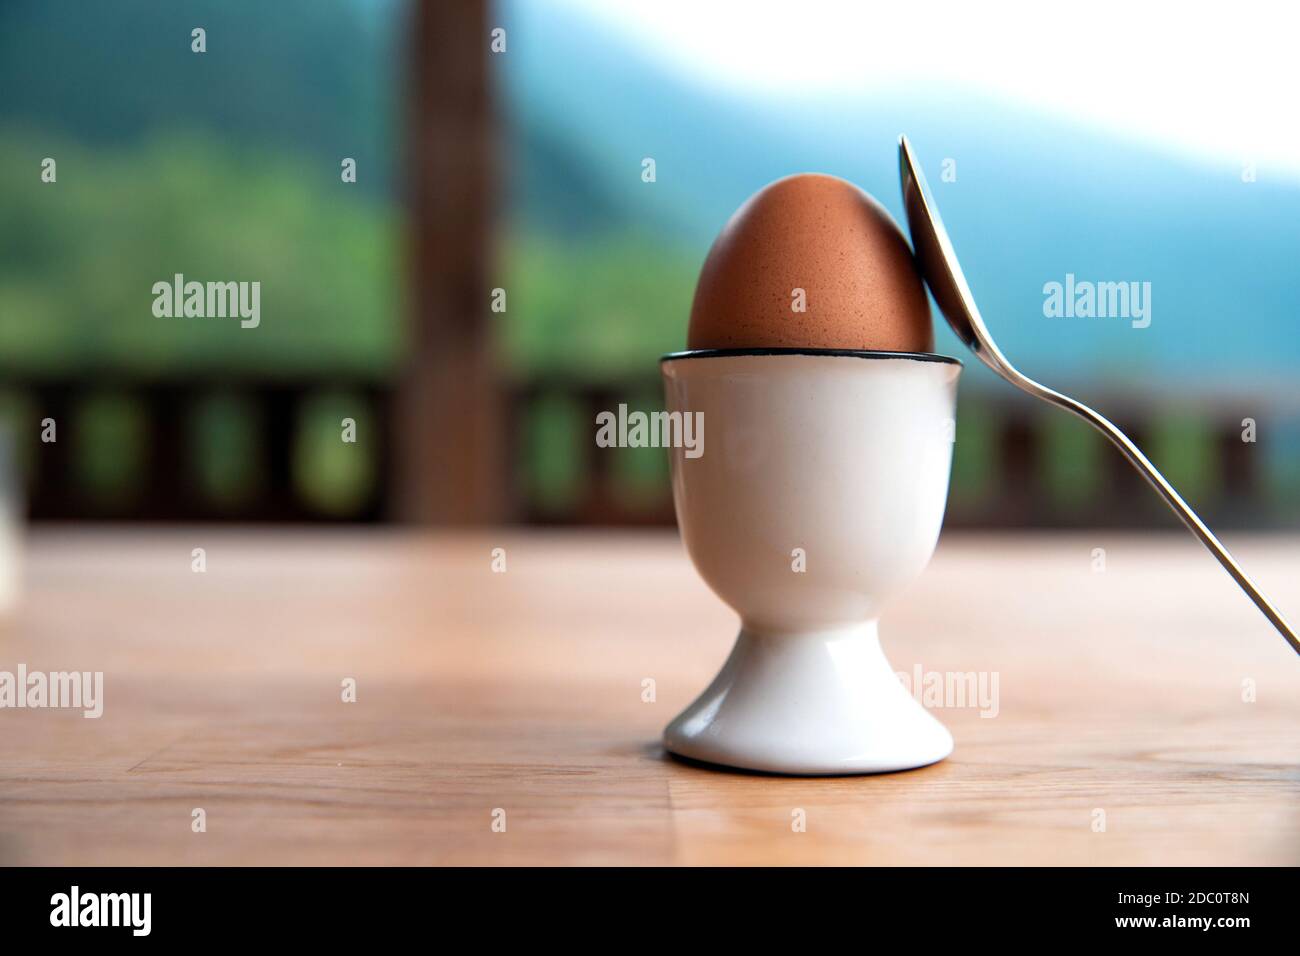 boiled egg in eggcup on wooden table outside, breakfast eggin white egg cup close-up Stock Photo